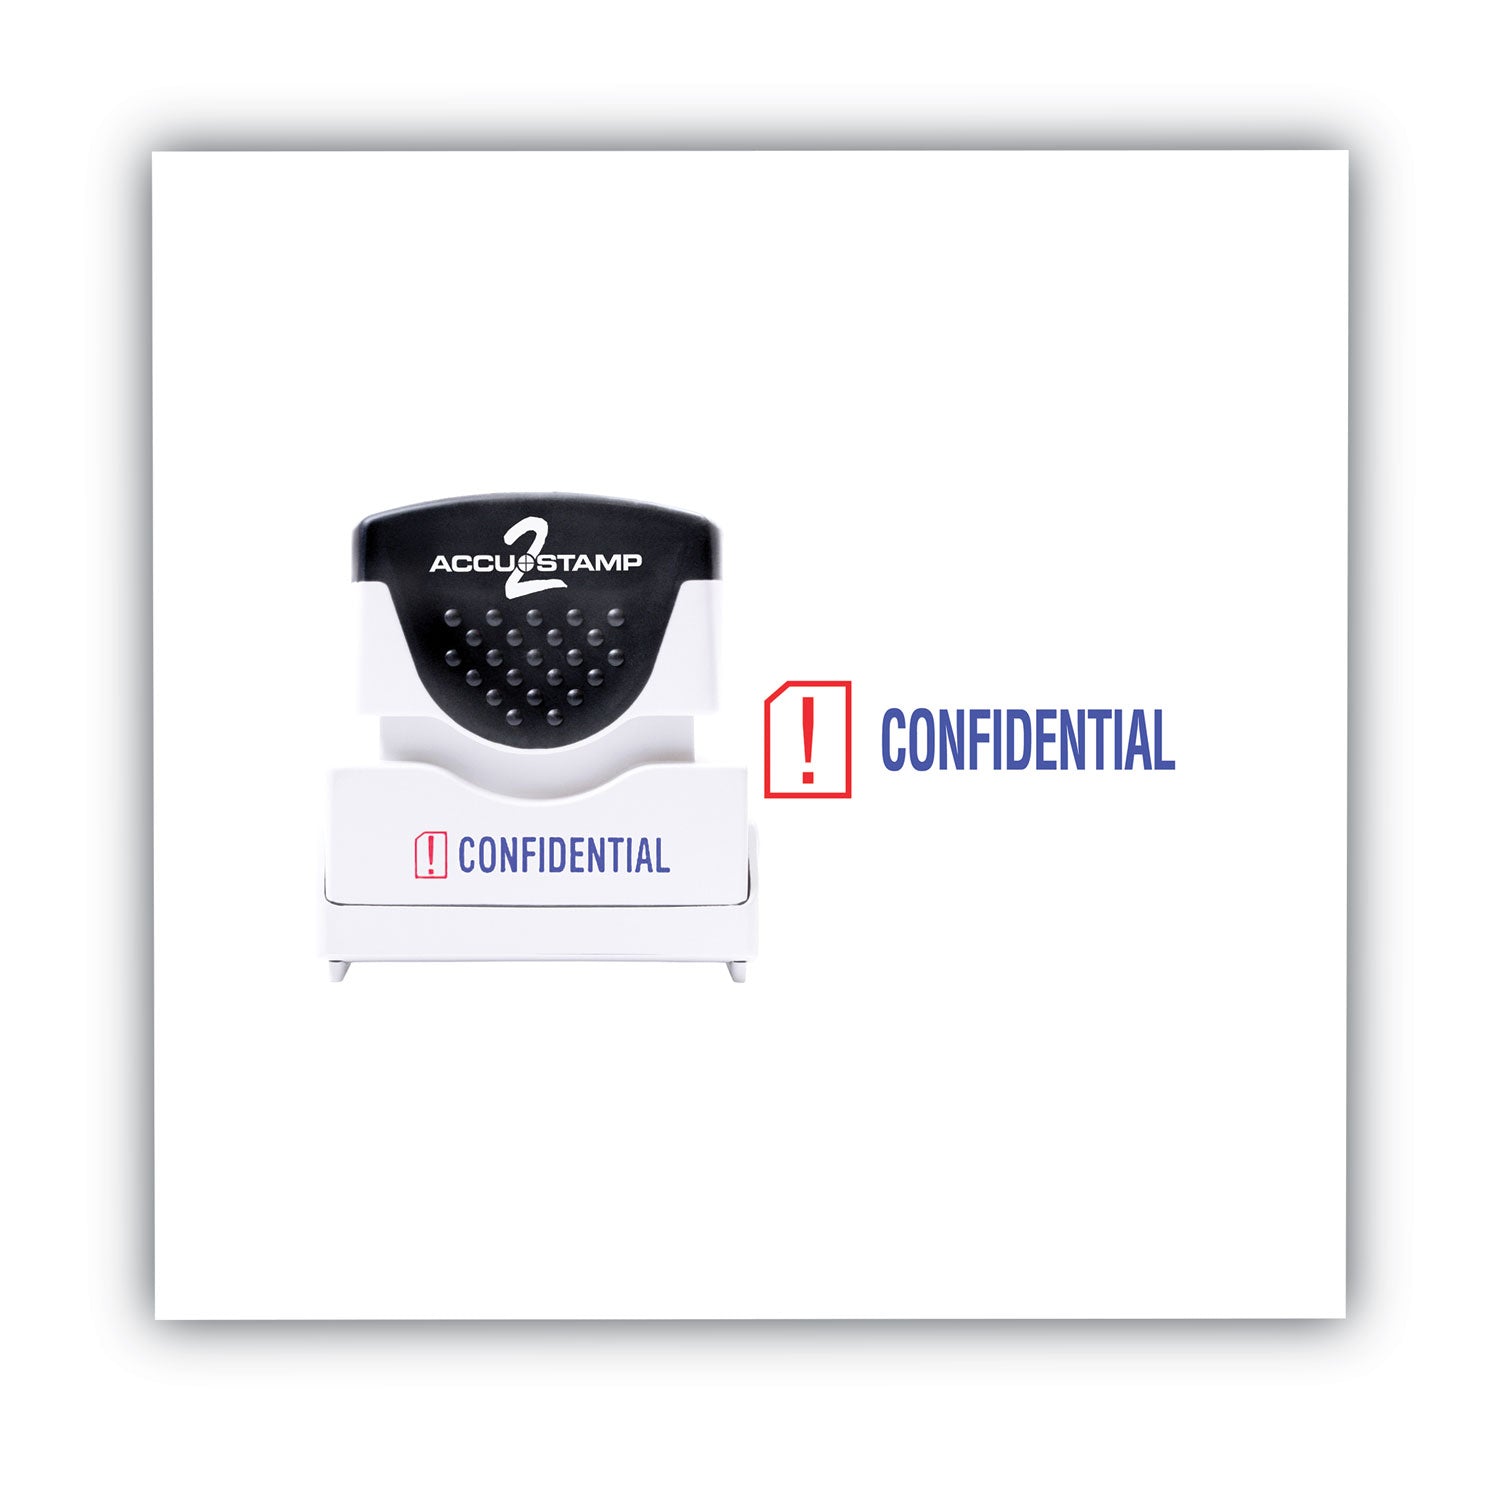 Pre-Inked Shutter Stamp, Red/Blue, CONFIDENTIAL, 1.63 x 0.5 - 